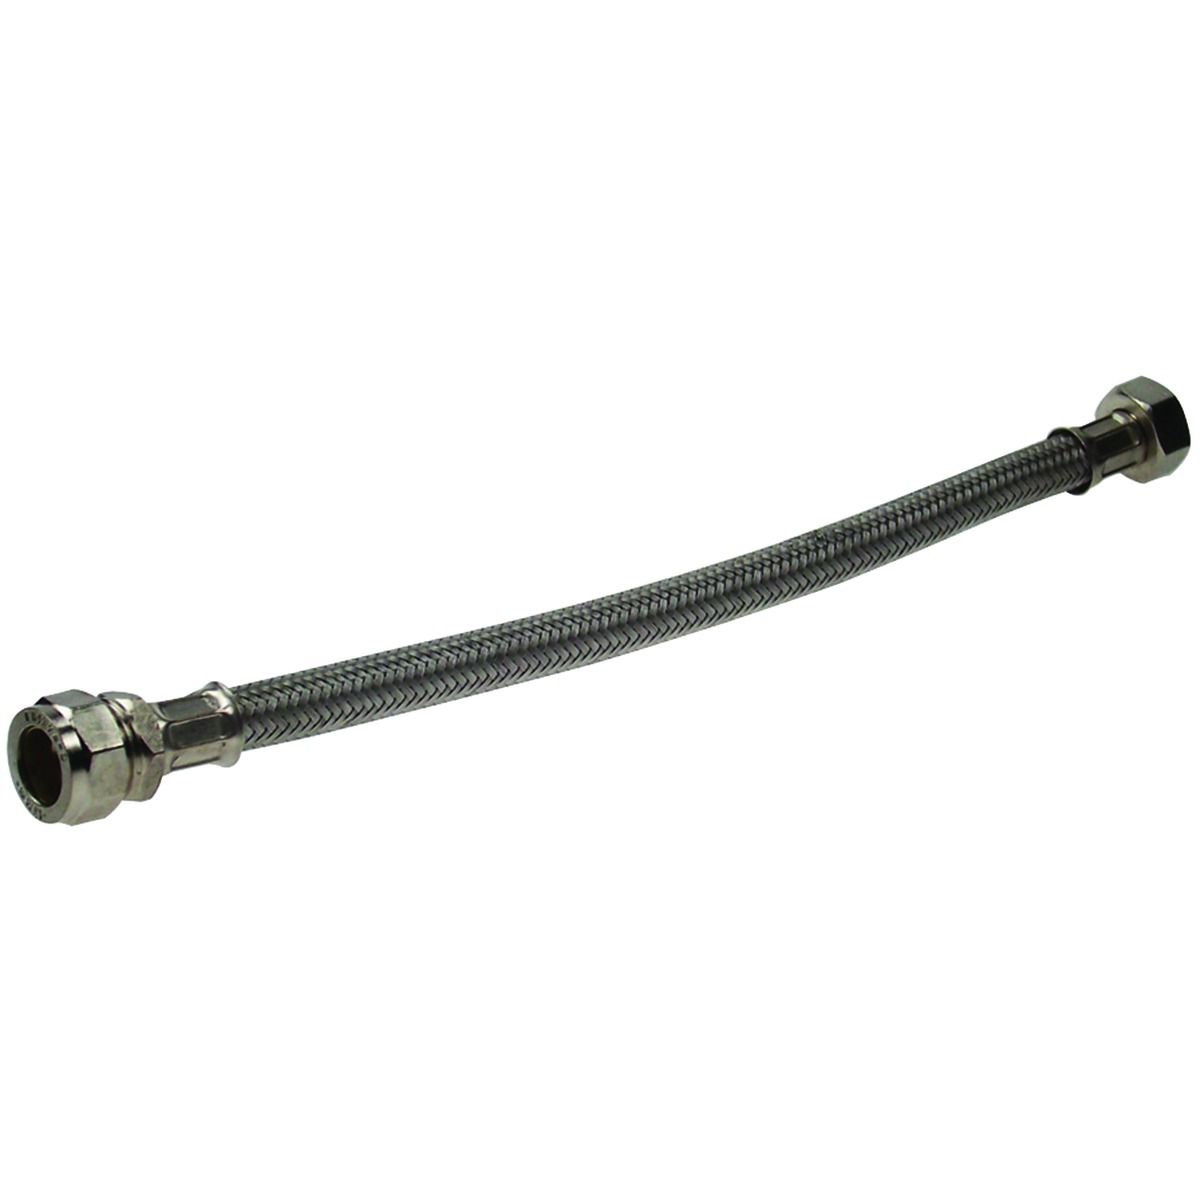 Wickes Flexible Tap Connector 15 x 12 x 300mm